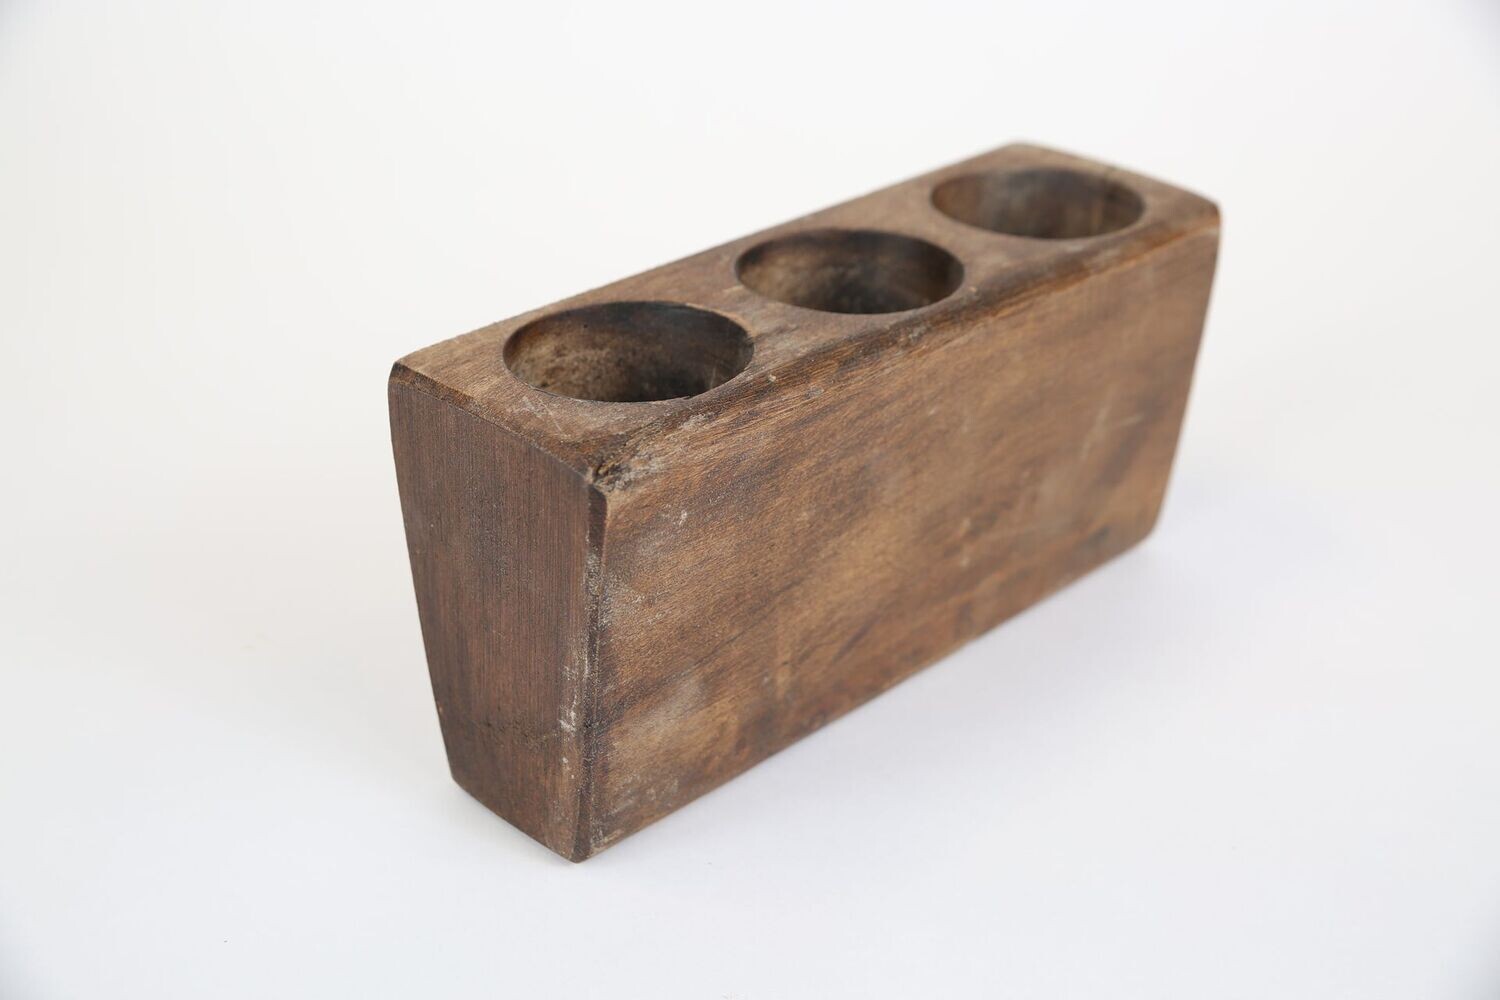 Rustic Sugar Mold-3 Hole-Rustic-Reproduction-Gorgeous-10 inches Long-Waxed